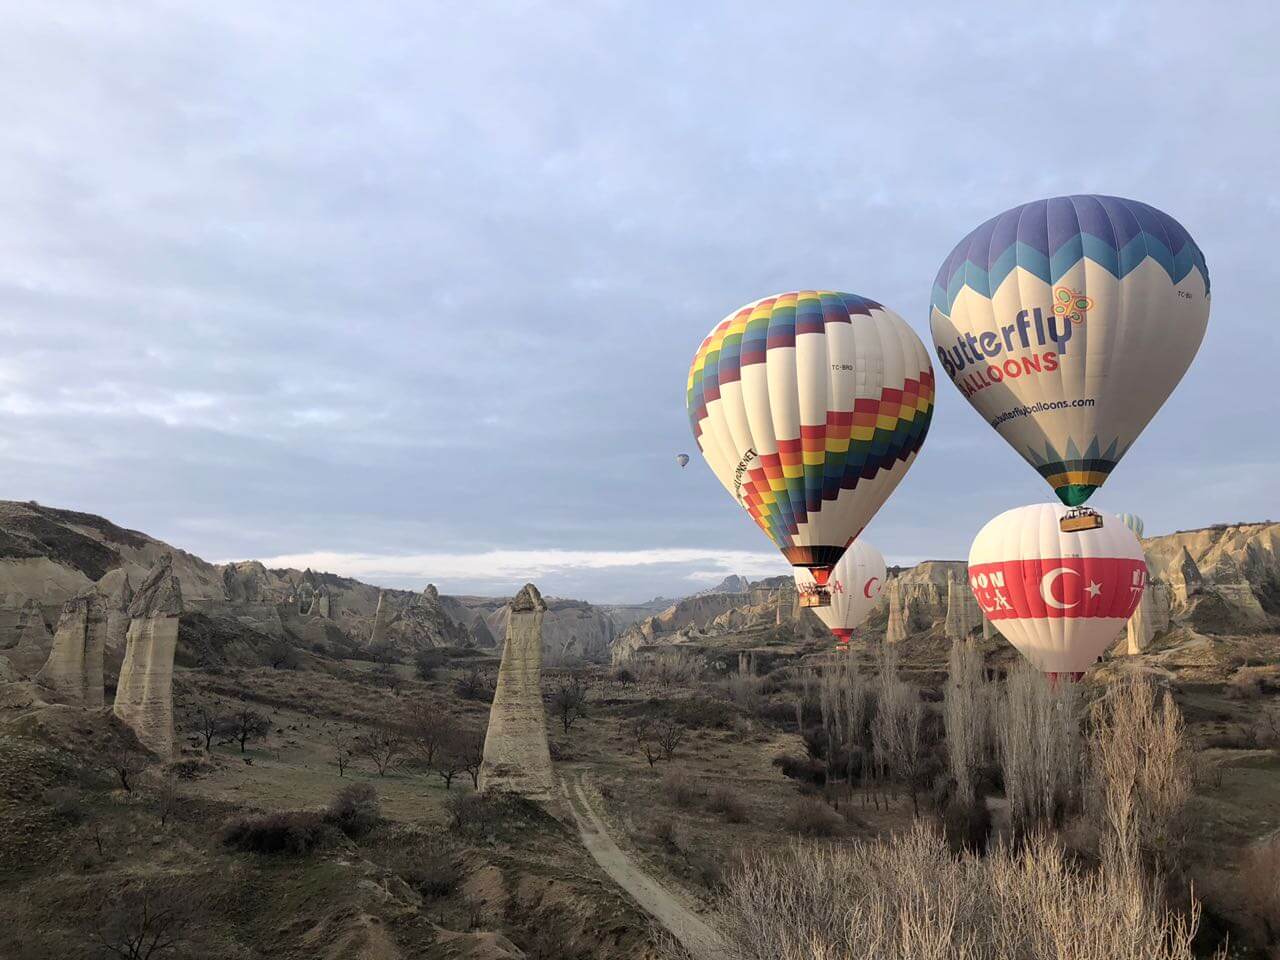 Royal Balloon gives you the best vantage point to see the rocky terrain from a close distance